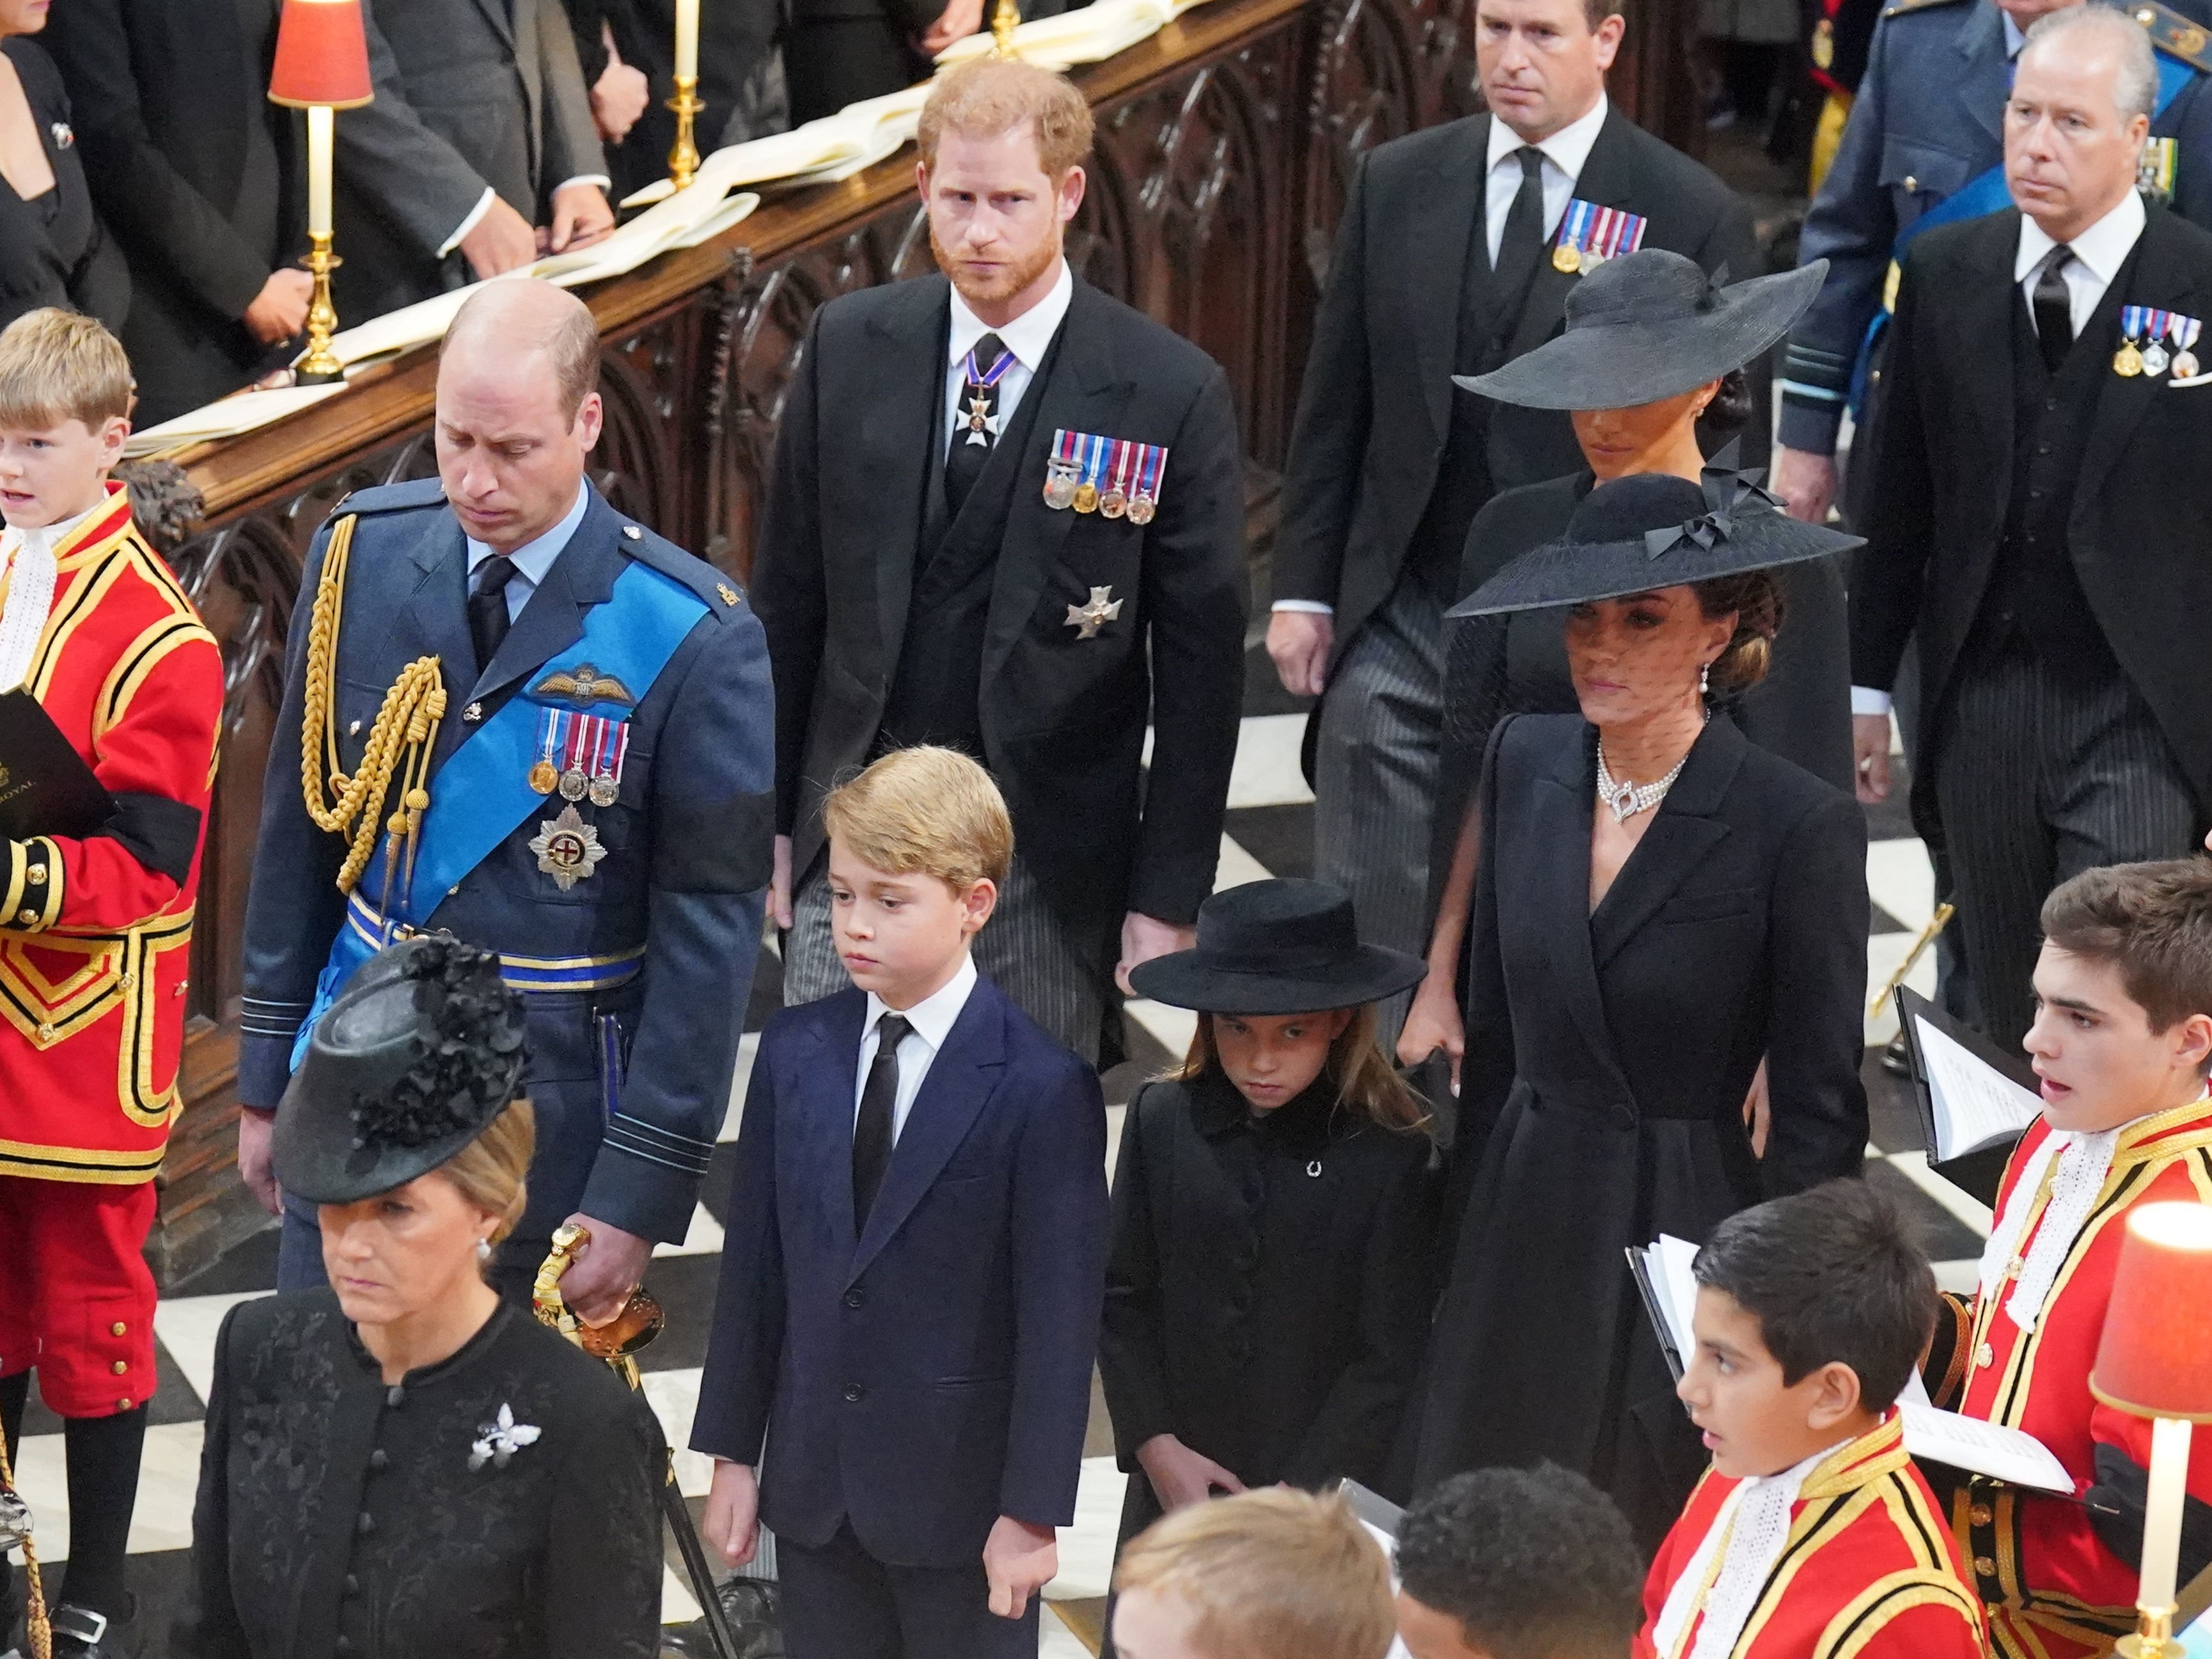 Prince William, Prince George, Prince Harry, Meghan Markle and Kate Middleton, during the state funeral of Queen Elizabeth II at Westminster Abbey on September 19, 2022 in London, England | Source: Getty Images